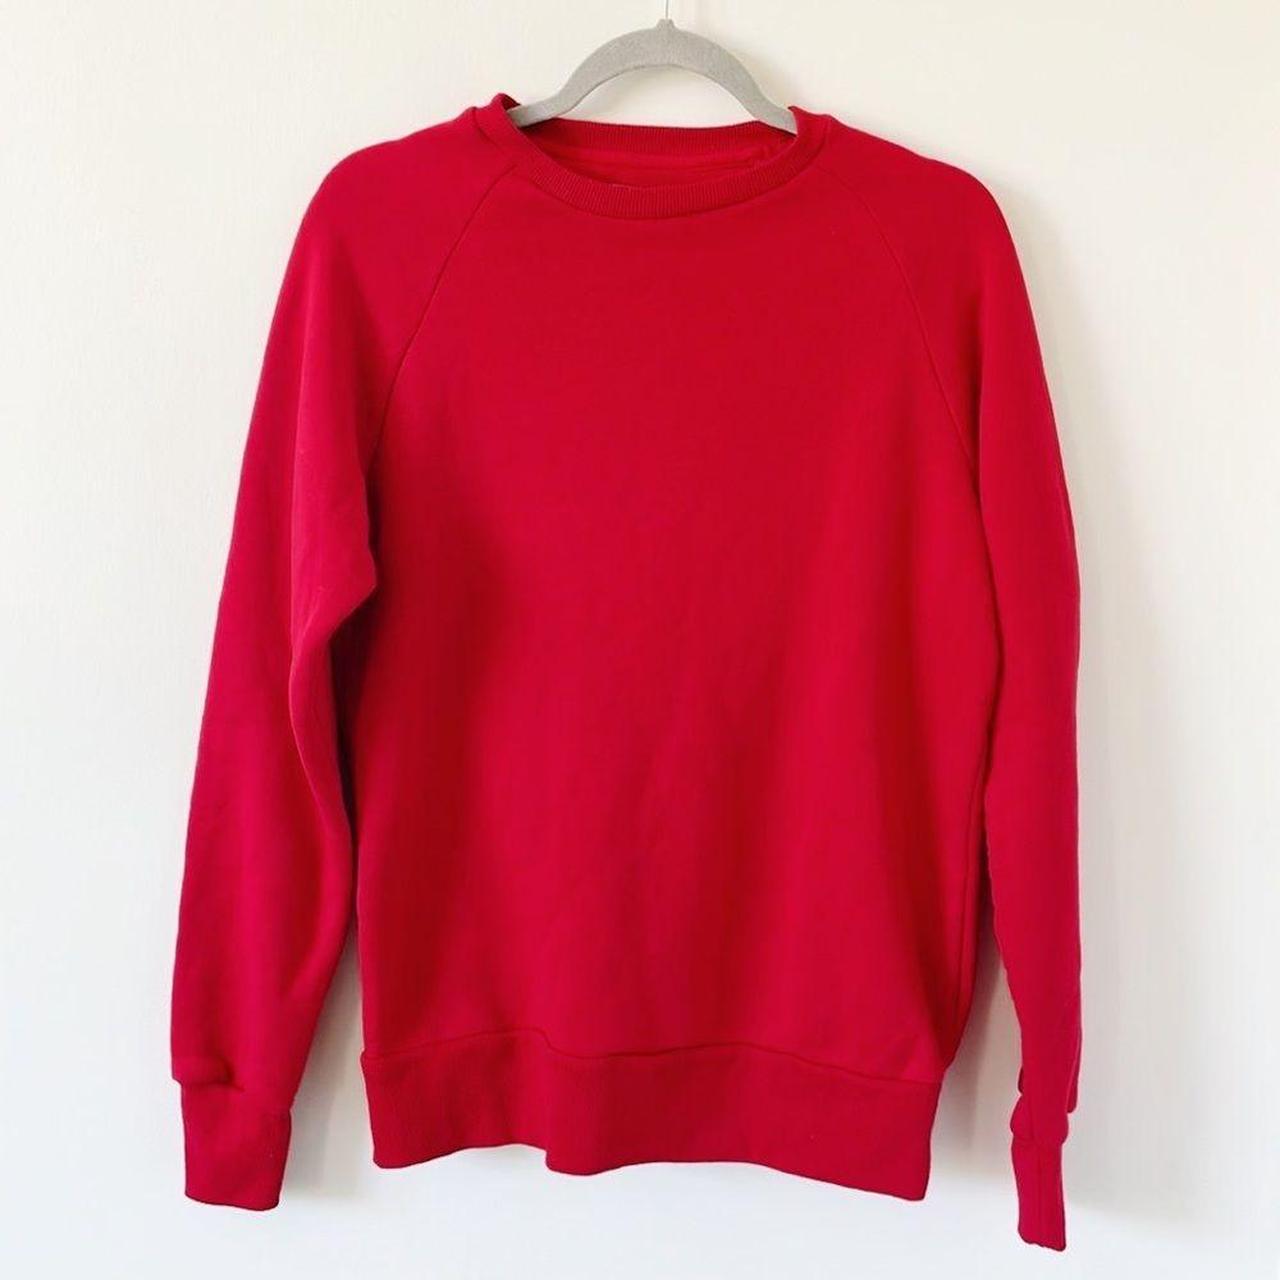 Product Image 1 - Brand: Primark
Size: Medium
Condition: Preowned with